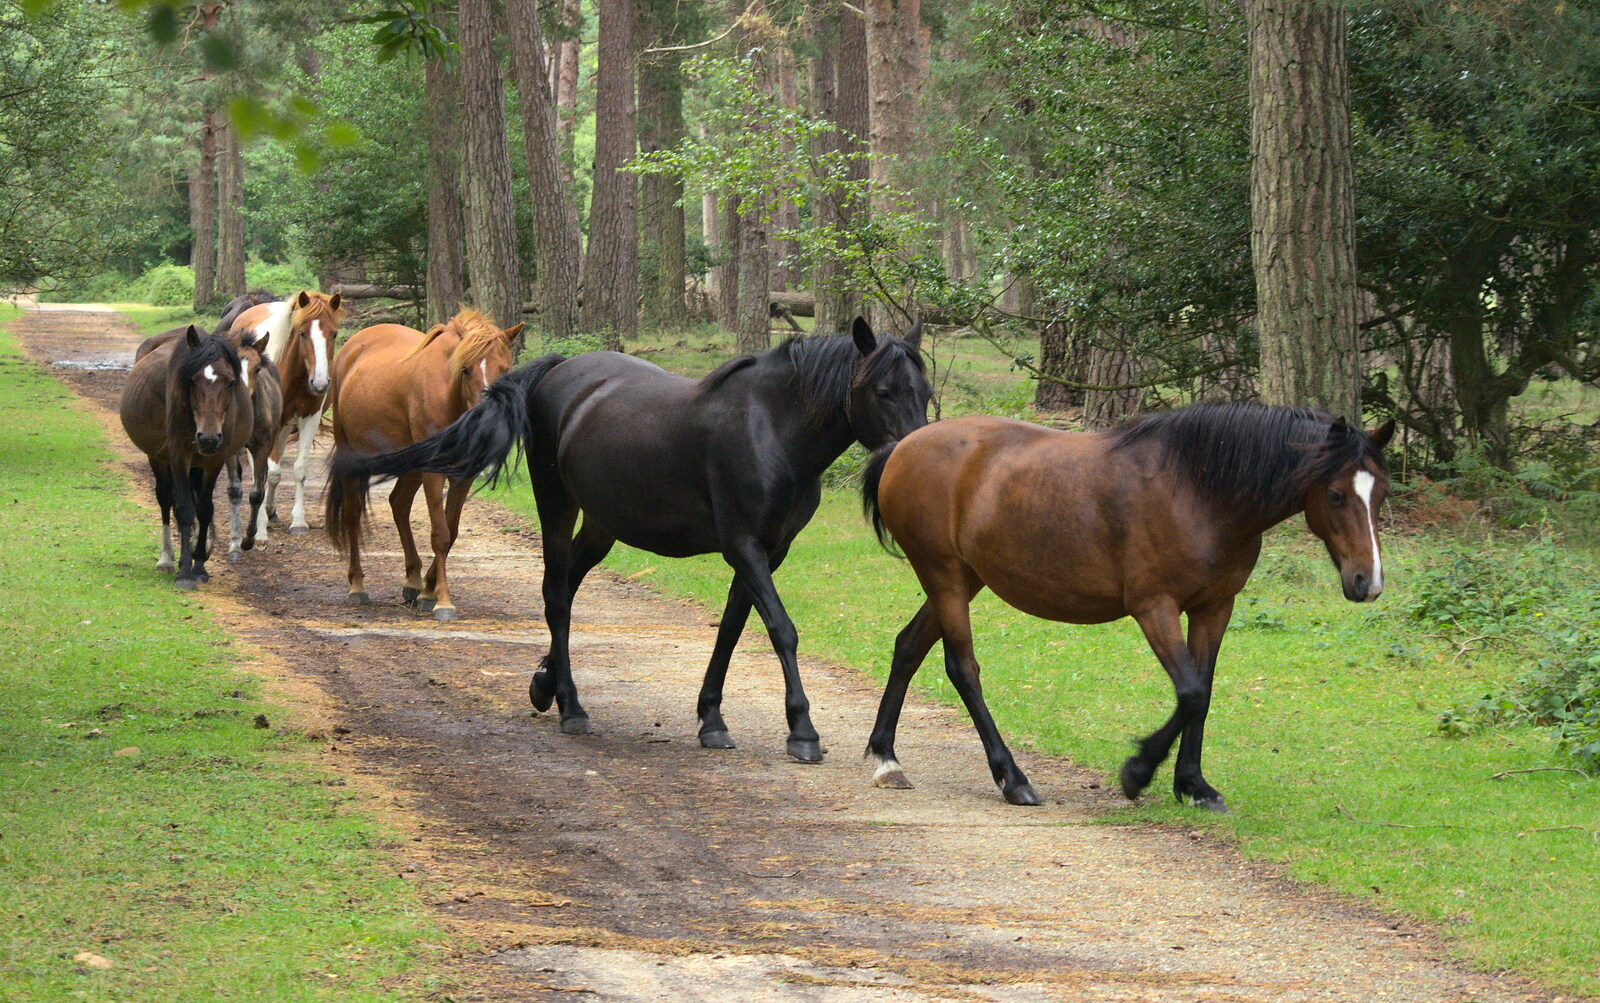 The ponies divert around us from Camping at Roundhills, Brockenhurst, New Forest, Hampshire - 29th August 2015